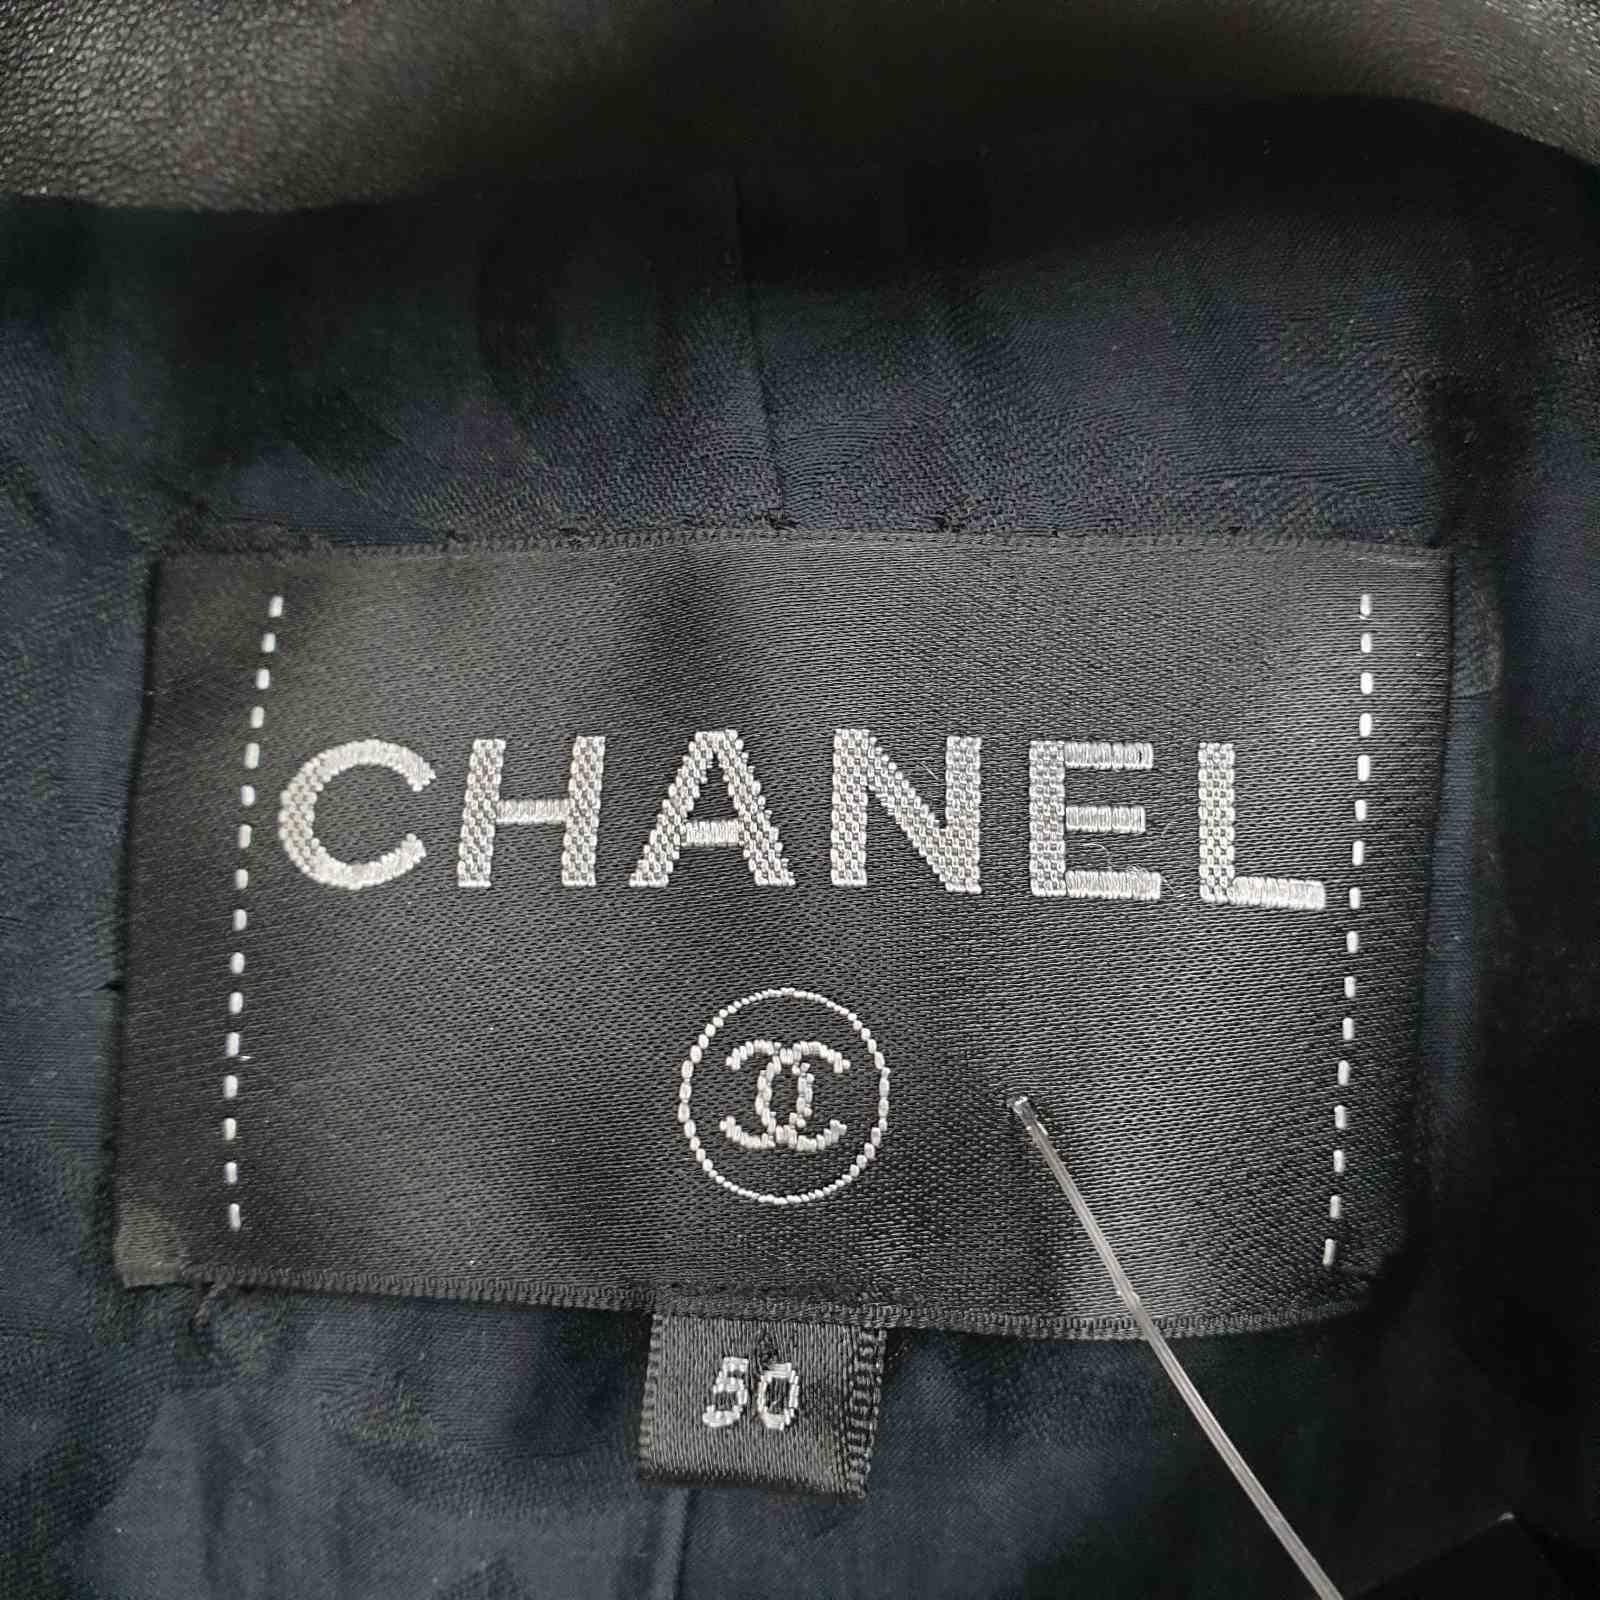 Chanel Black Leather Patent Leather Jacket 4